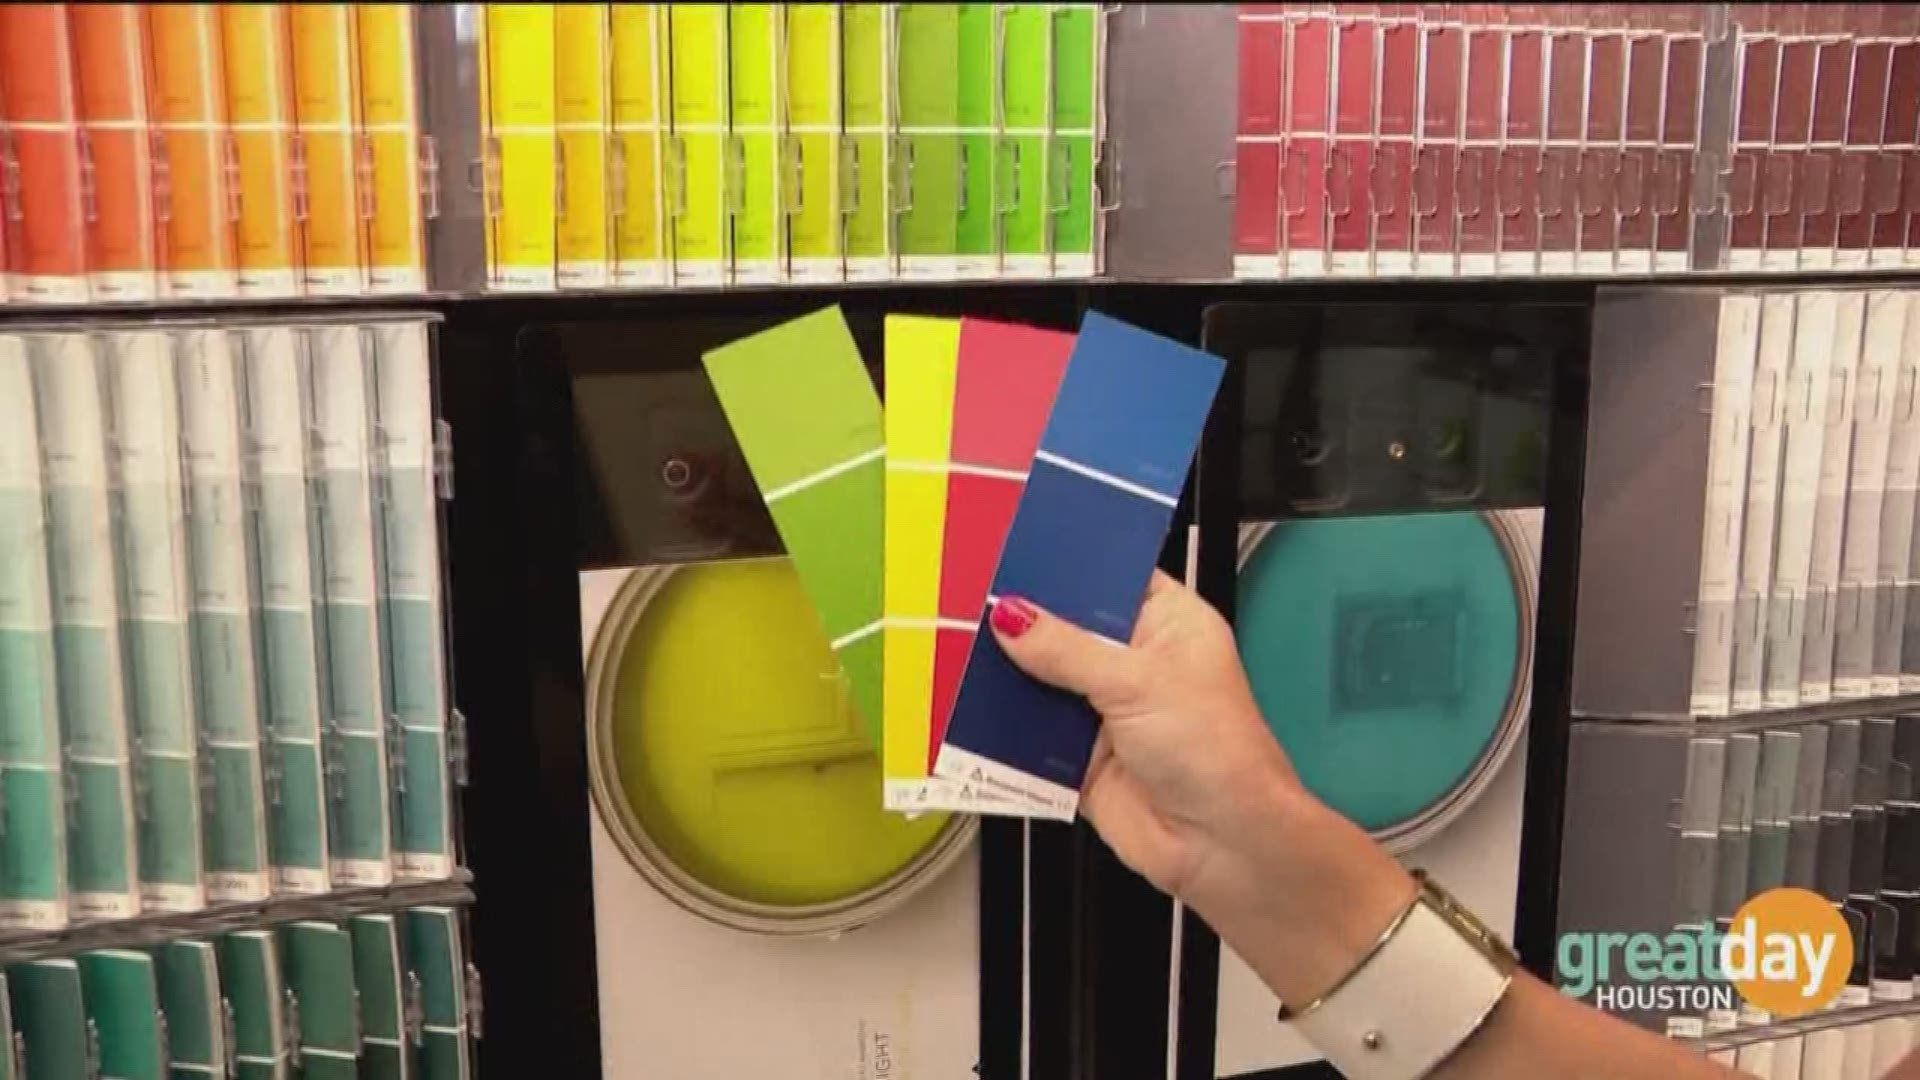 Color expert Lauren Battistini and Great Day's Cristina Kooker visit SRH Paint Co. a Benjamin Moore paint store to discuss getting the perfect hue for you and your home.   There are so many choices when it comes to paint color, watch to see how Lauren mak